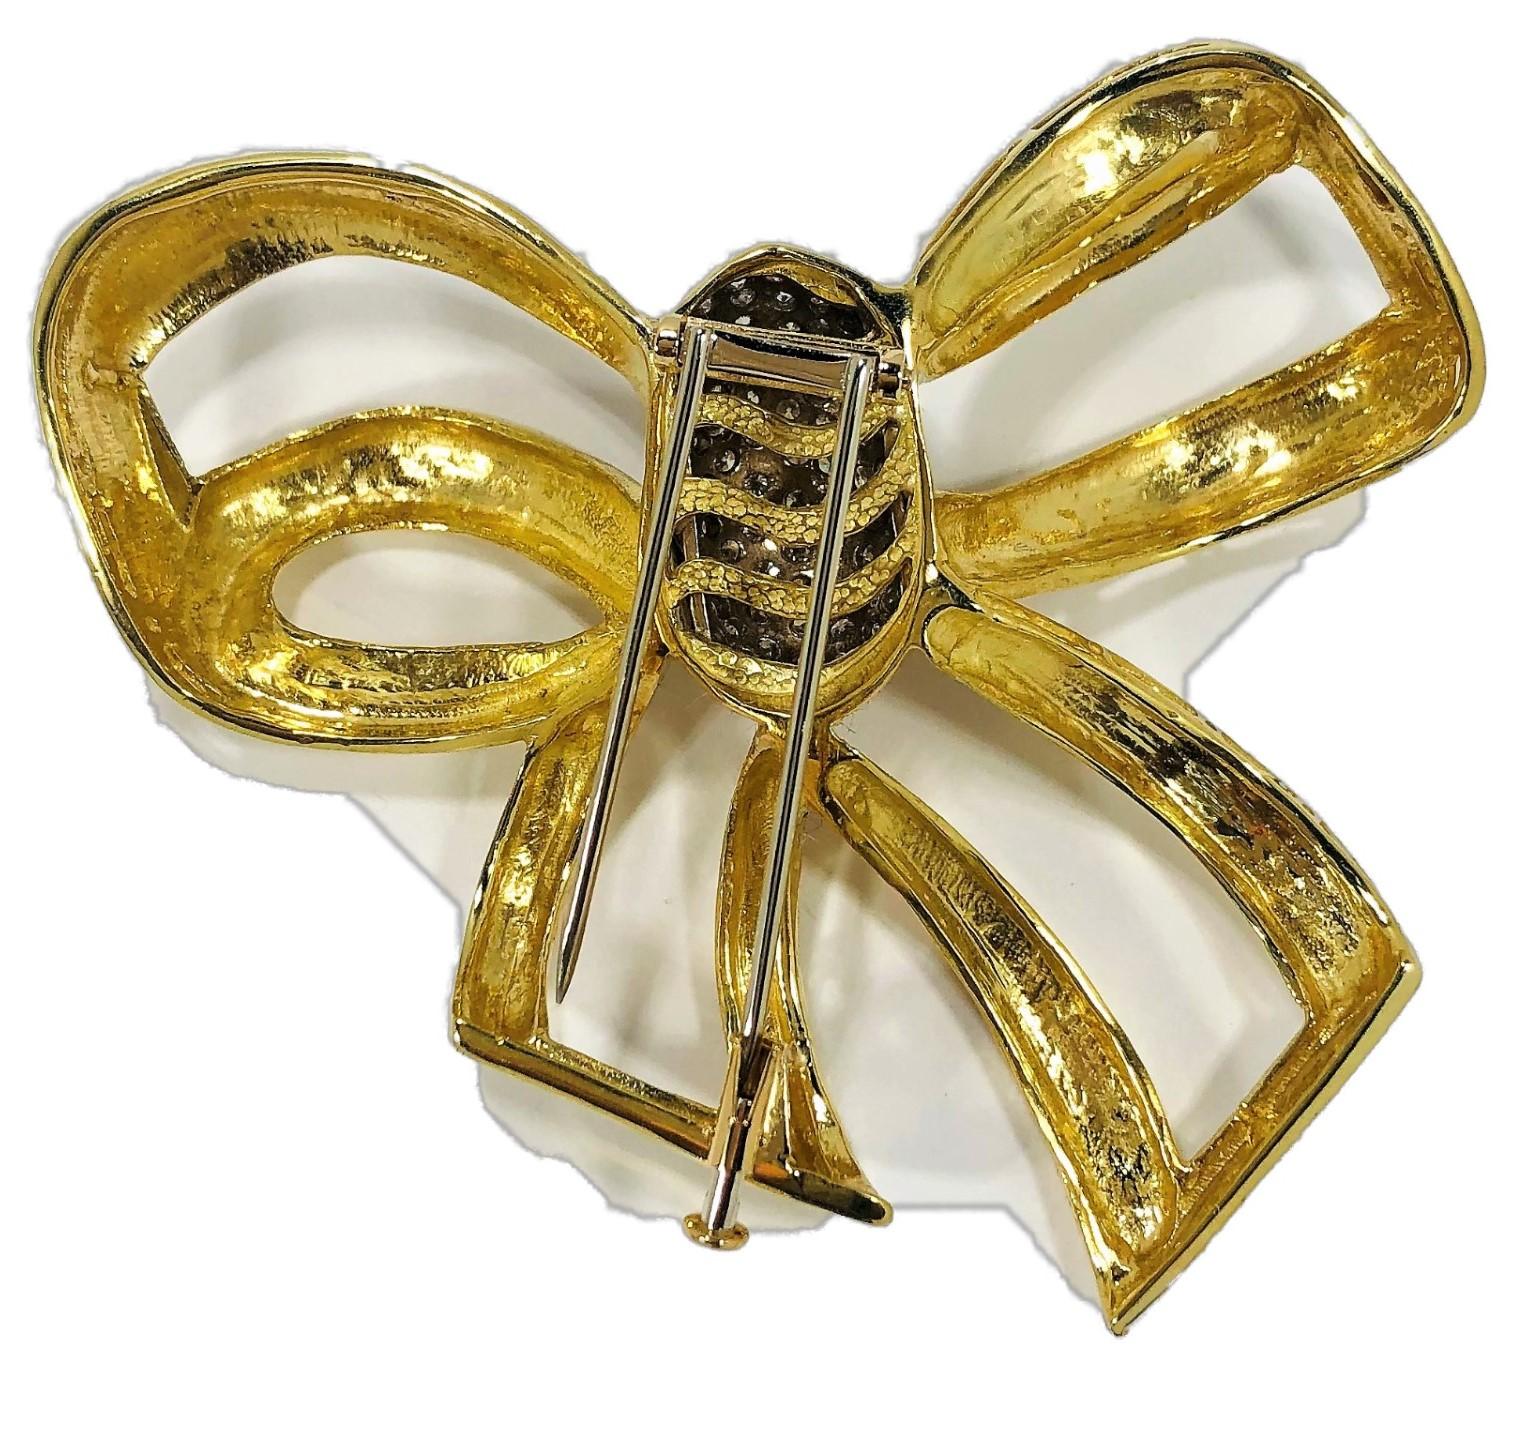 This extra large, stylish and outstanding bow brooch is crafted in 18K Yellow Gold with a White Gold pave diamond dome in the center. The dome is set with brilliant cut diamonds weighing an approximate total of 2.0CT of overall H Color and SI1